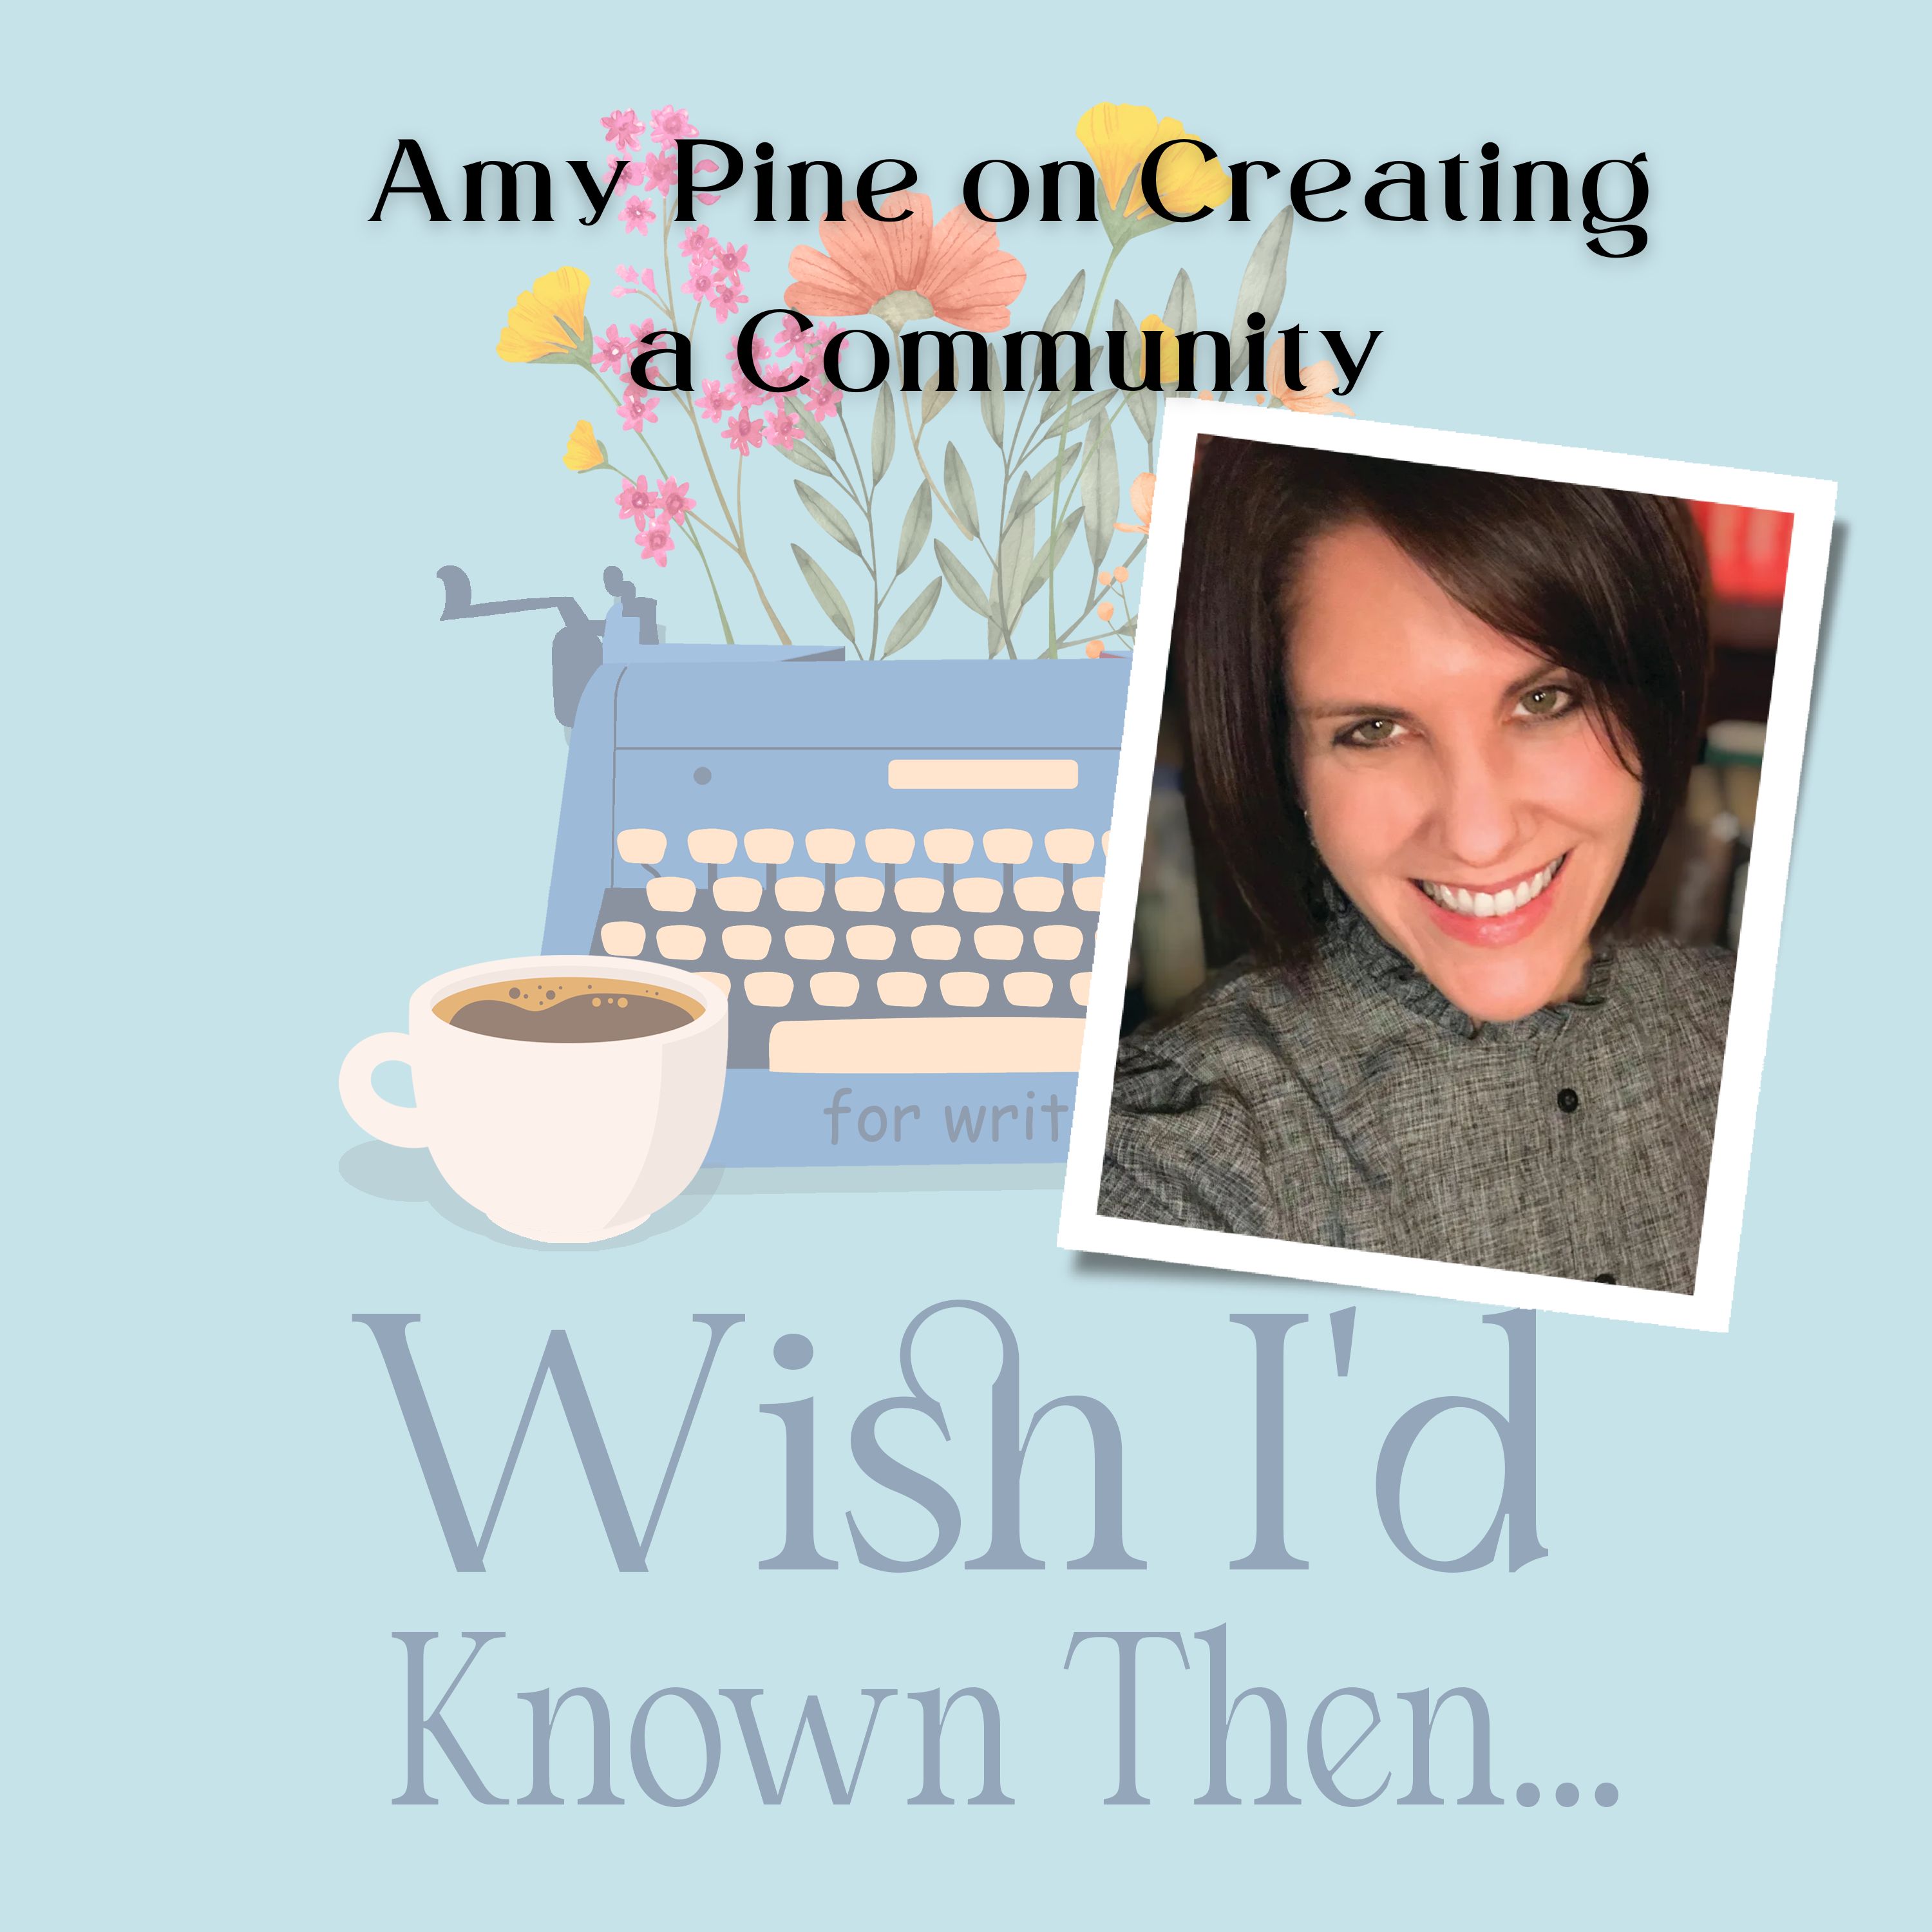 Amy Pine on Creating a Community